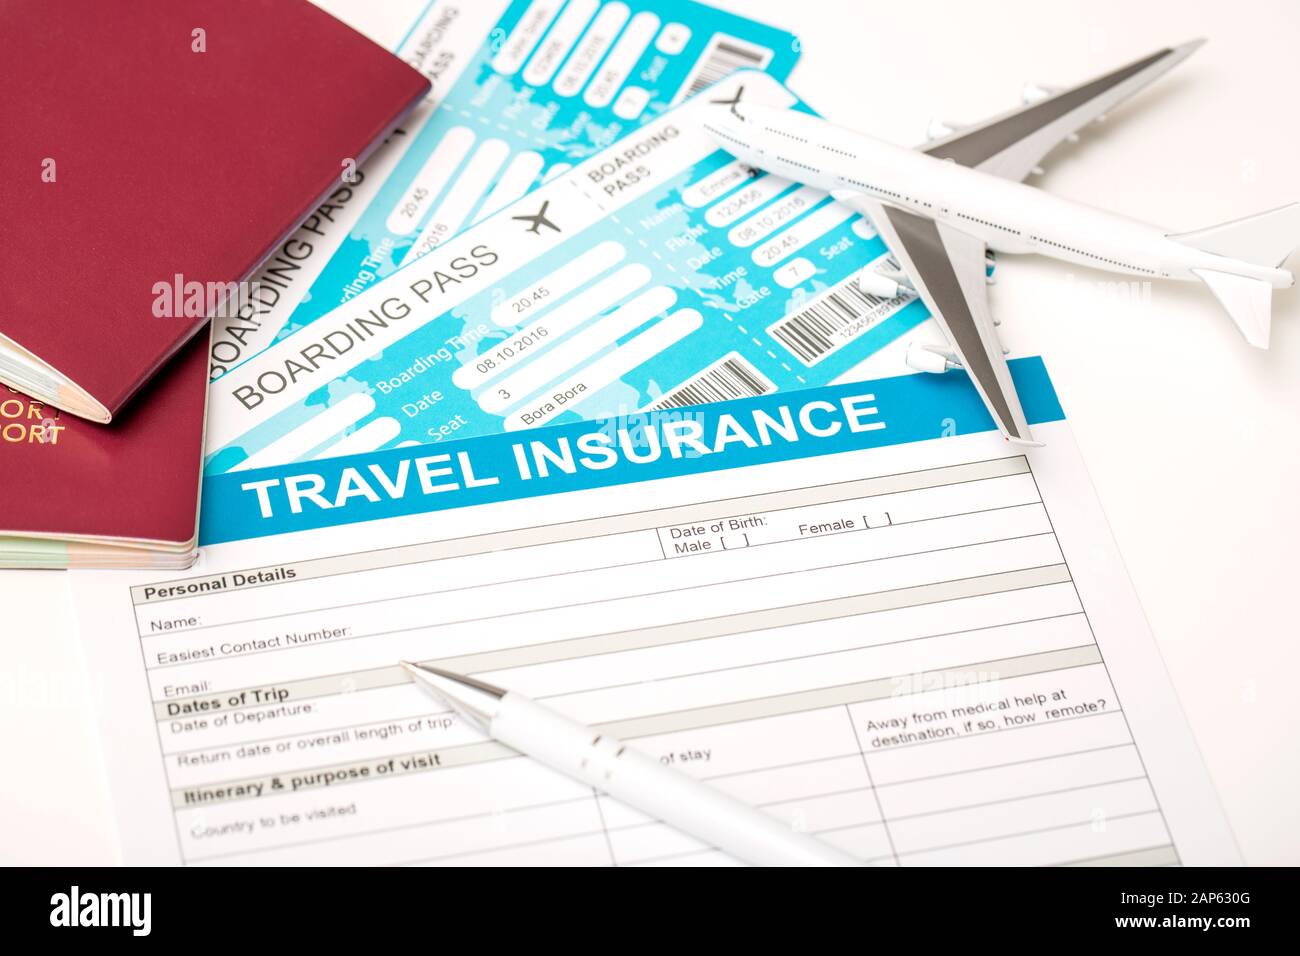 travel agent ticket safe plan trip holiday model insurance money concept air form business security paper transportation concept - stock image Stock Photo